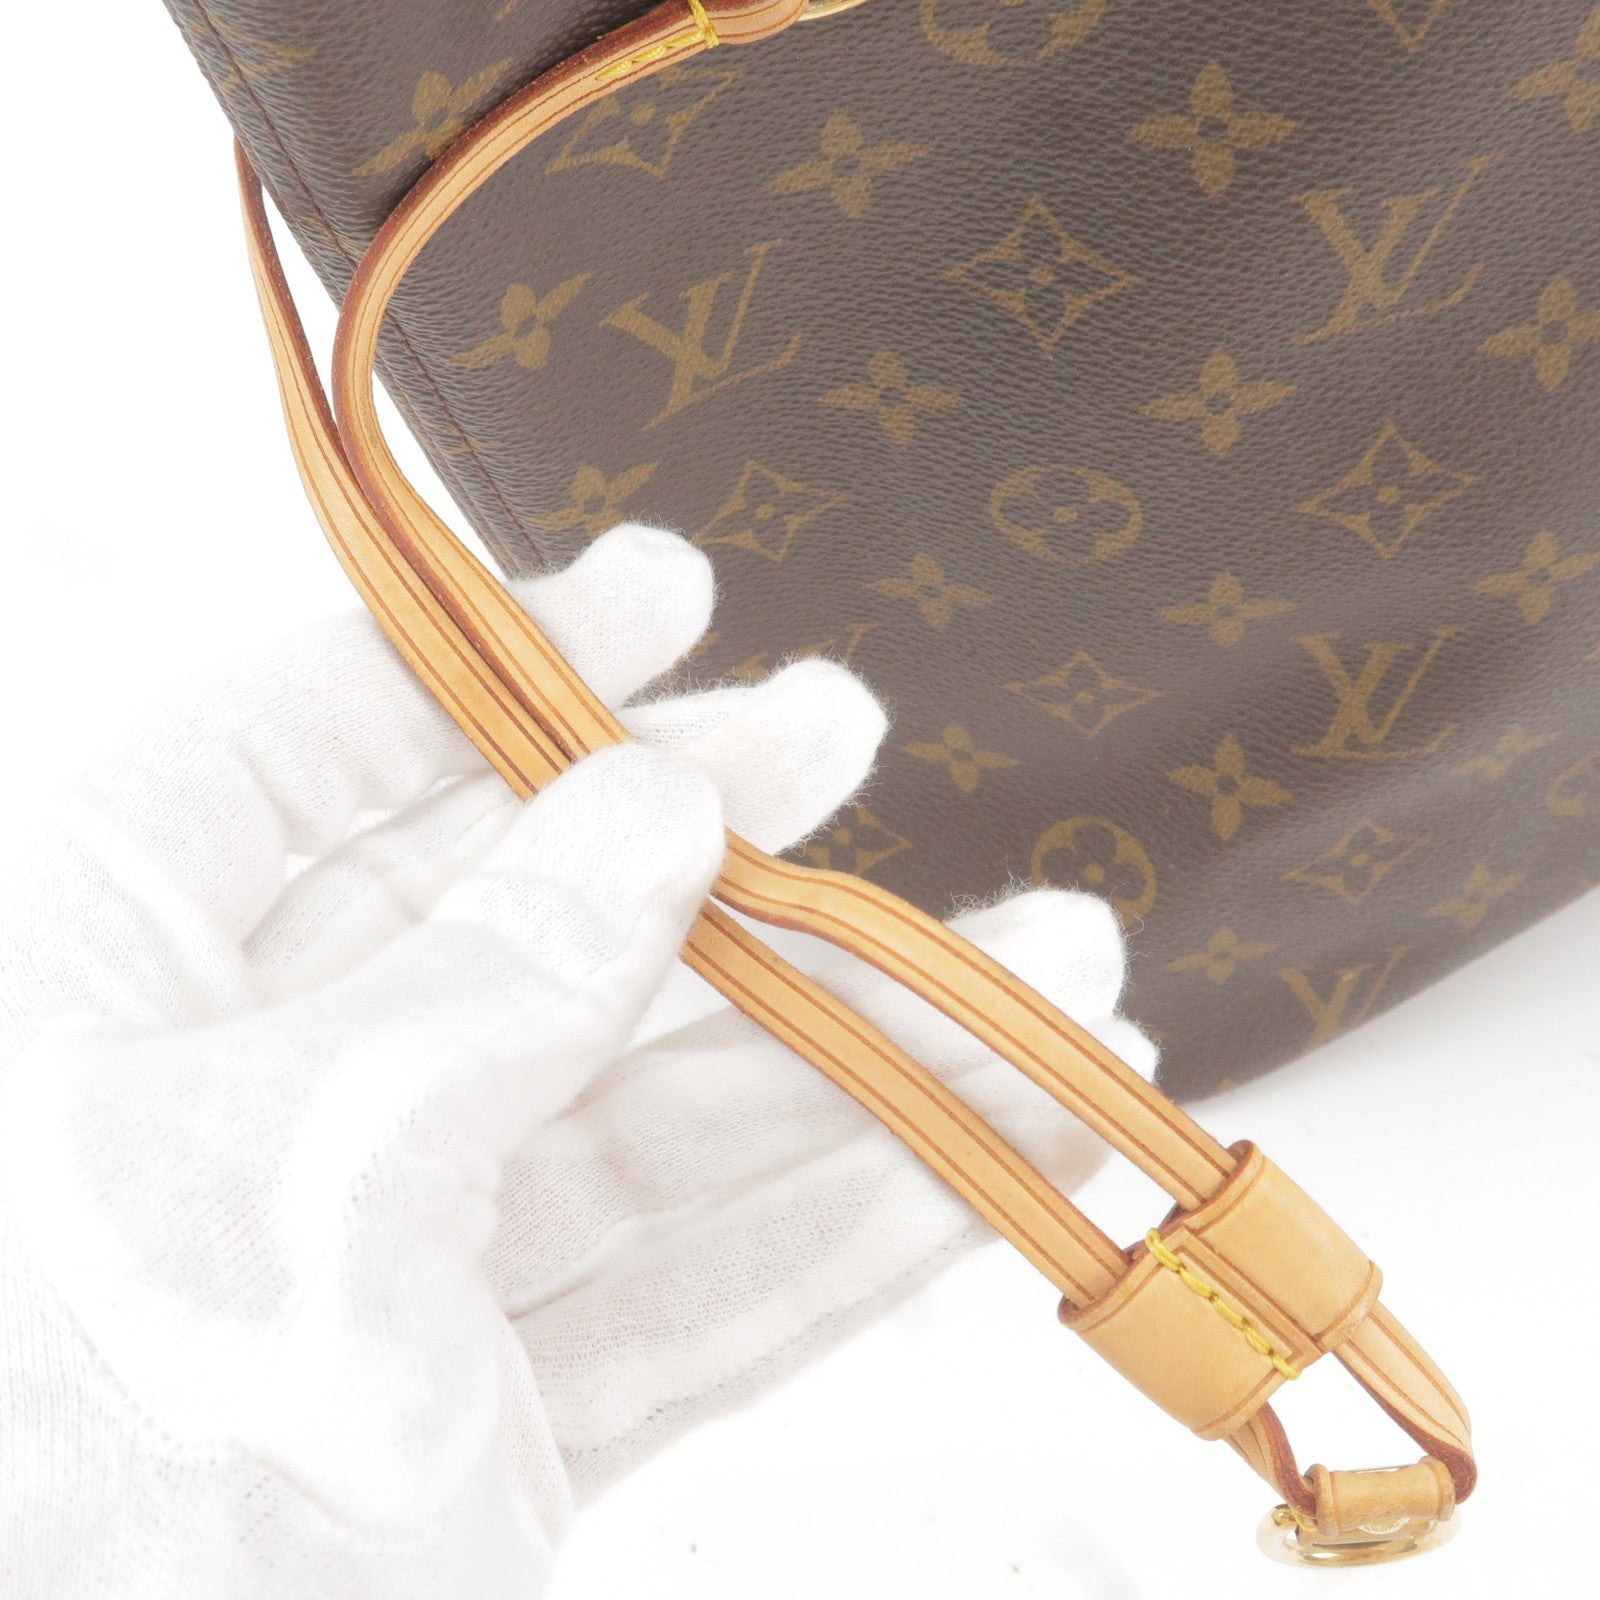 Vintage Louis Vuitton Handbags and Purses - 4,211 For Sale at